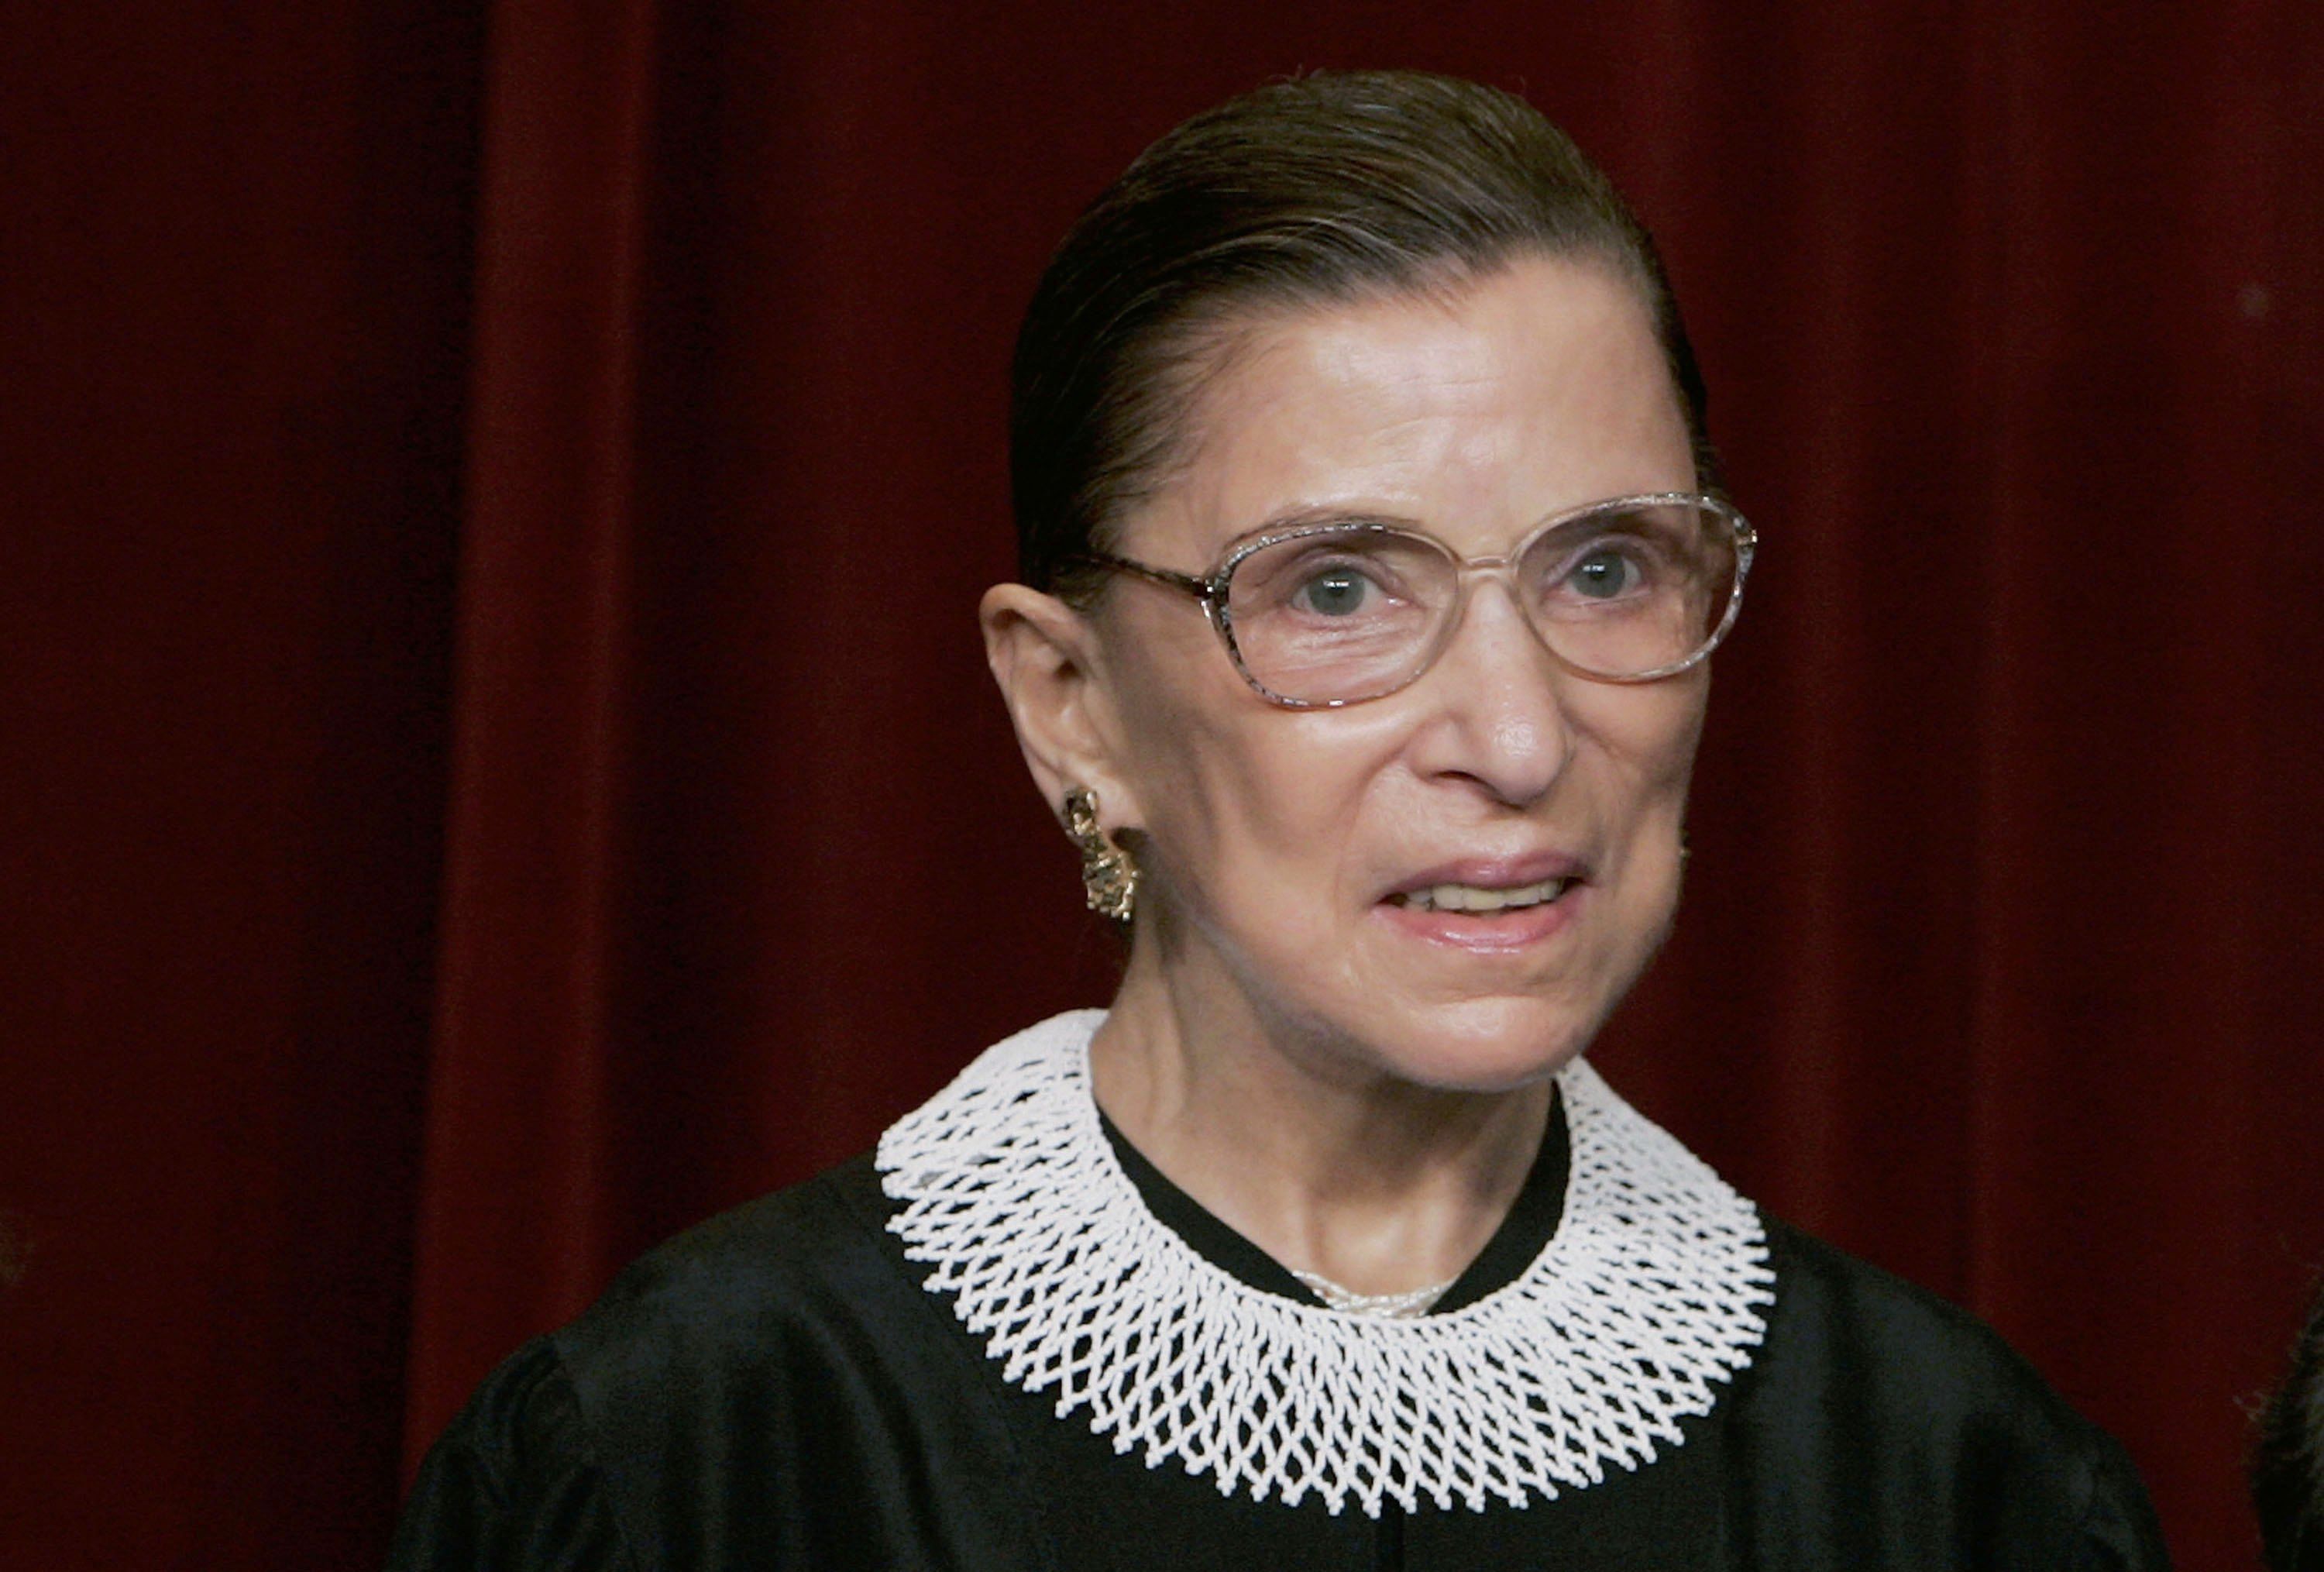 Supreme Court Justice Ruth Bader Ginsburg at the U.S. Supreme Court in 2006 in Washington DC | Source: Getty Images